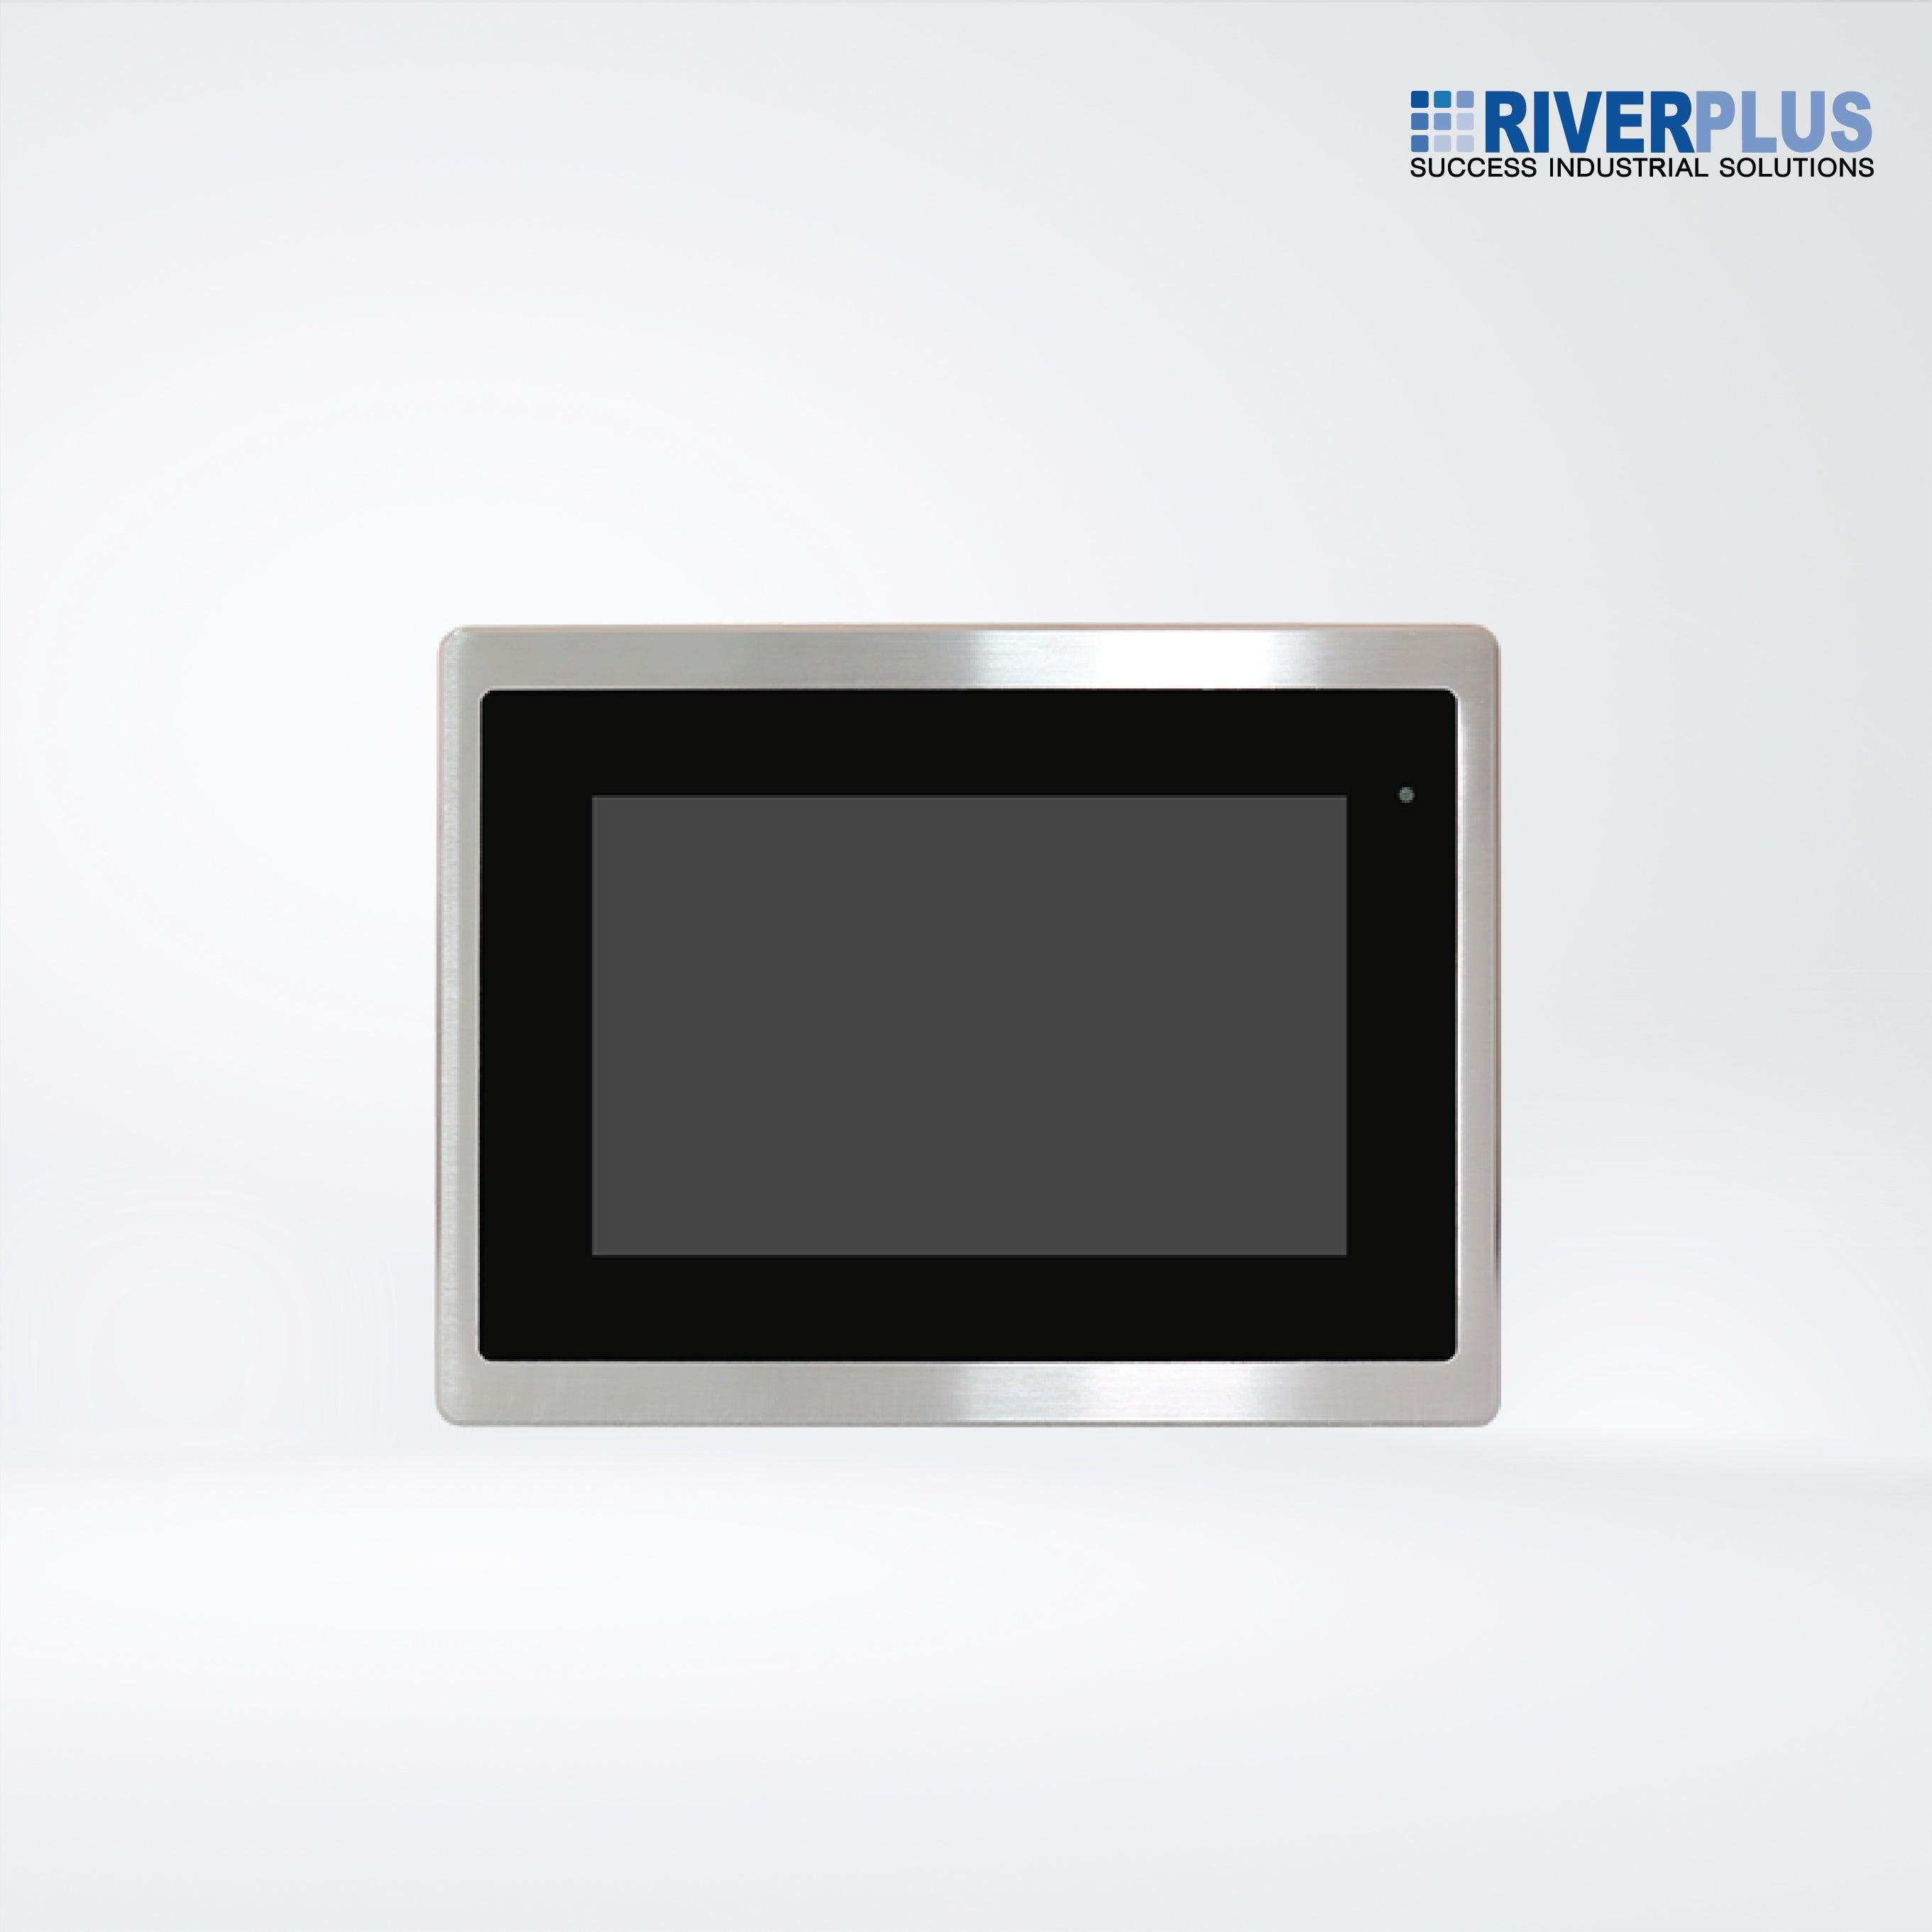 FABS-107PH 7” Flat Front Panel IP66 Stainless Chassis Display - Riverplus